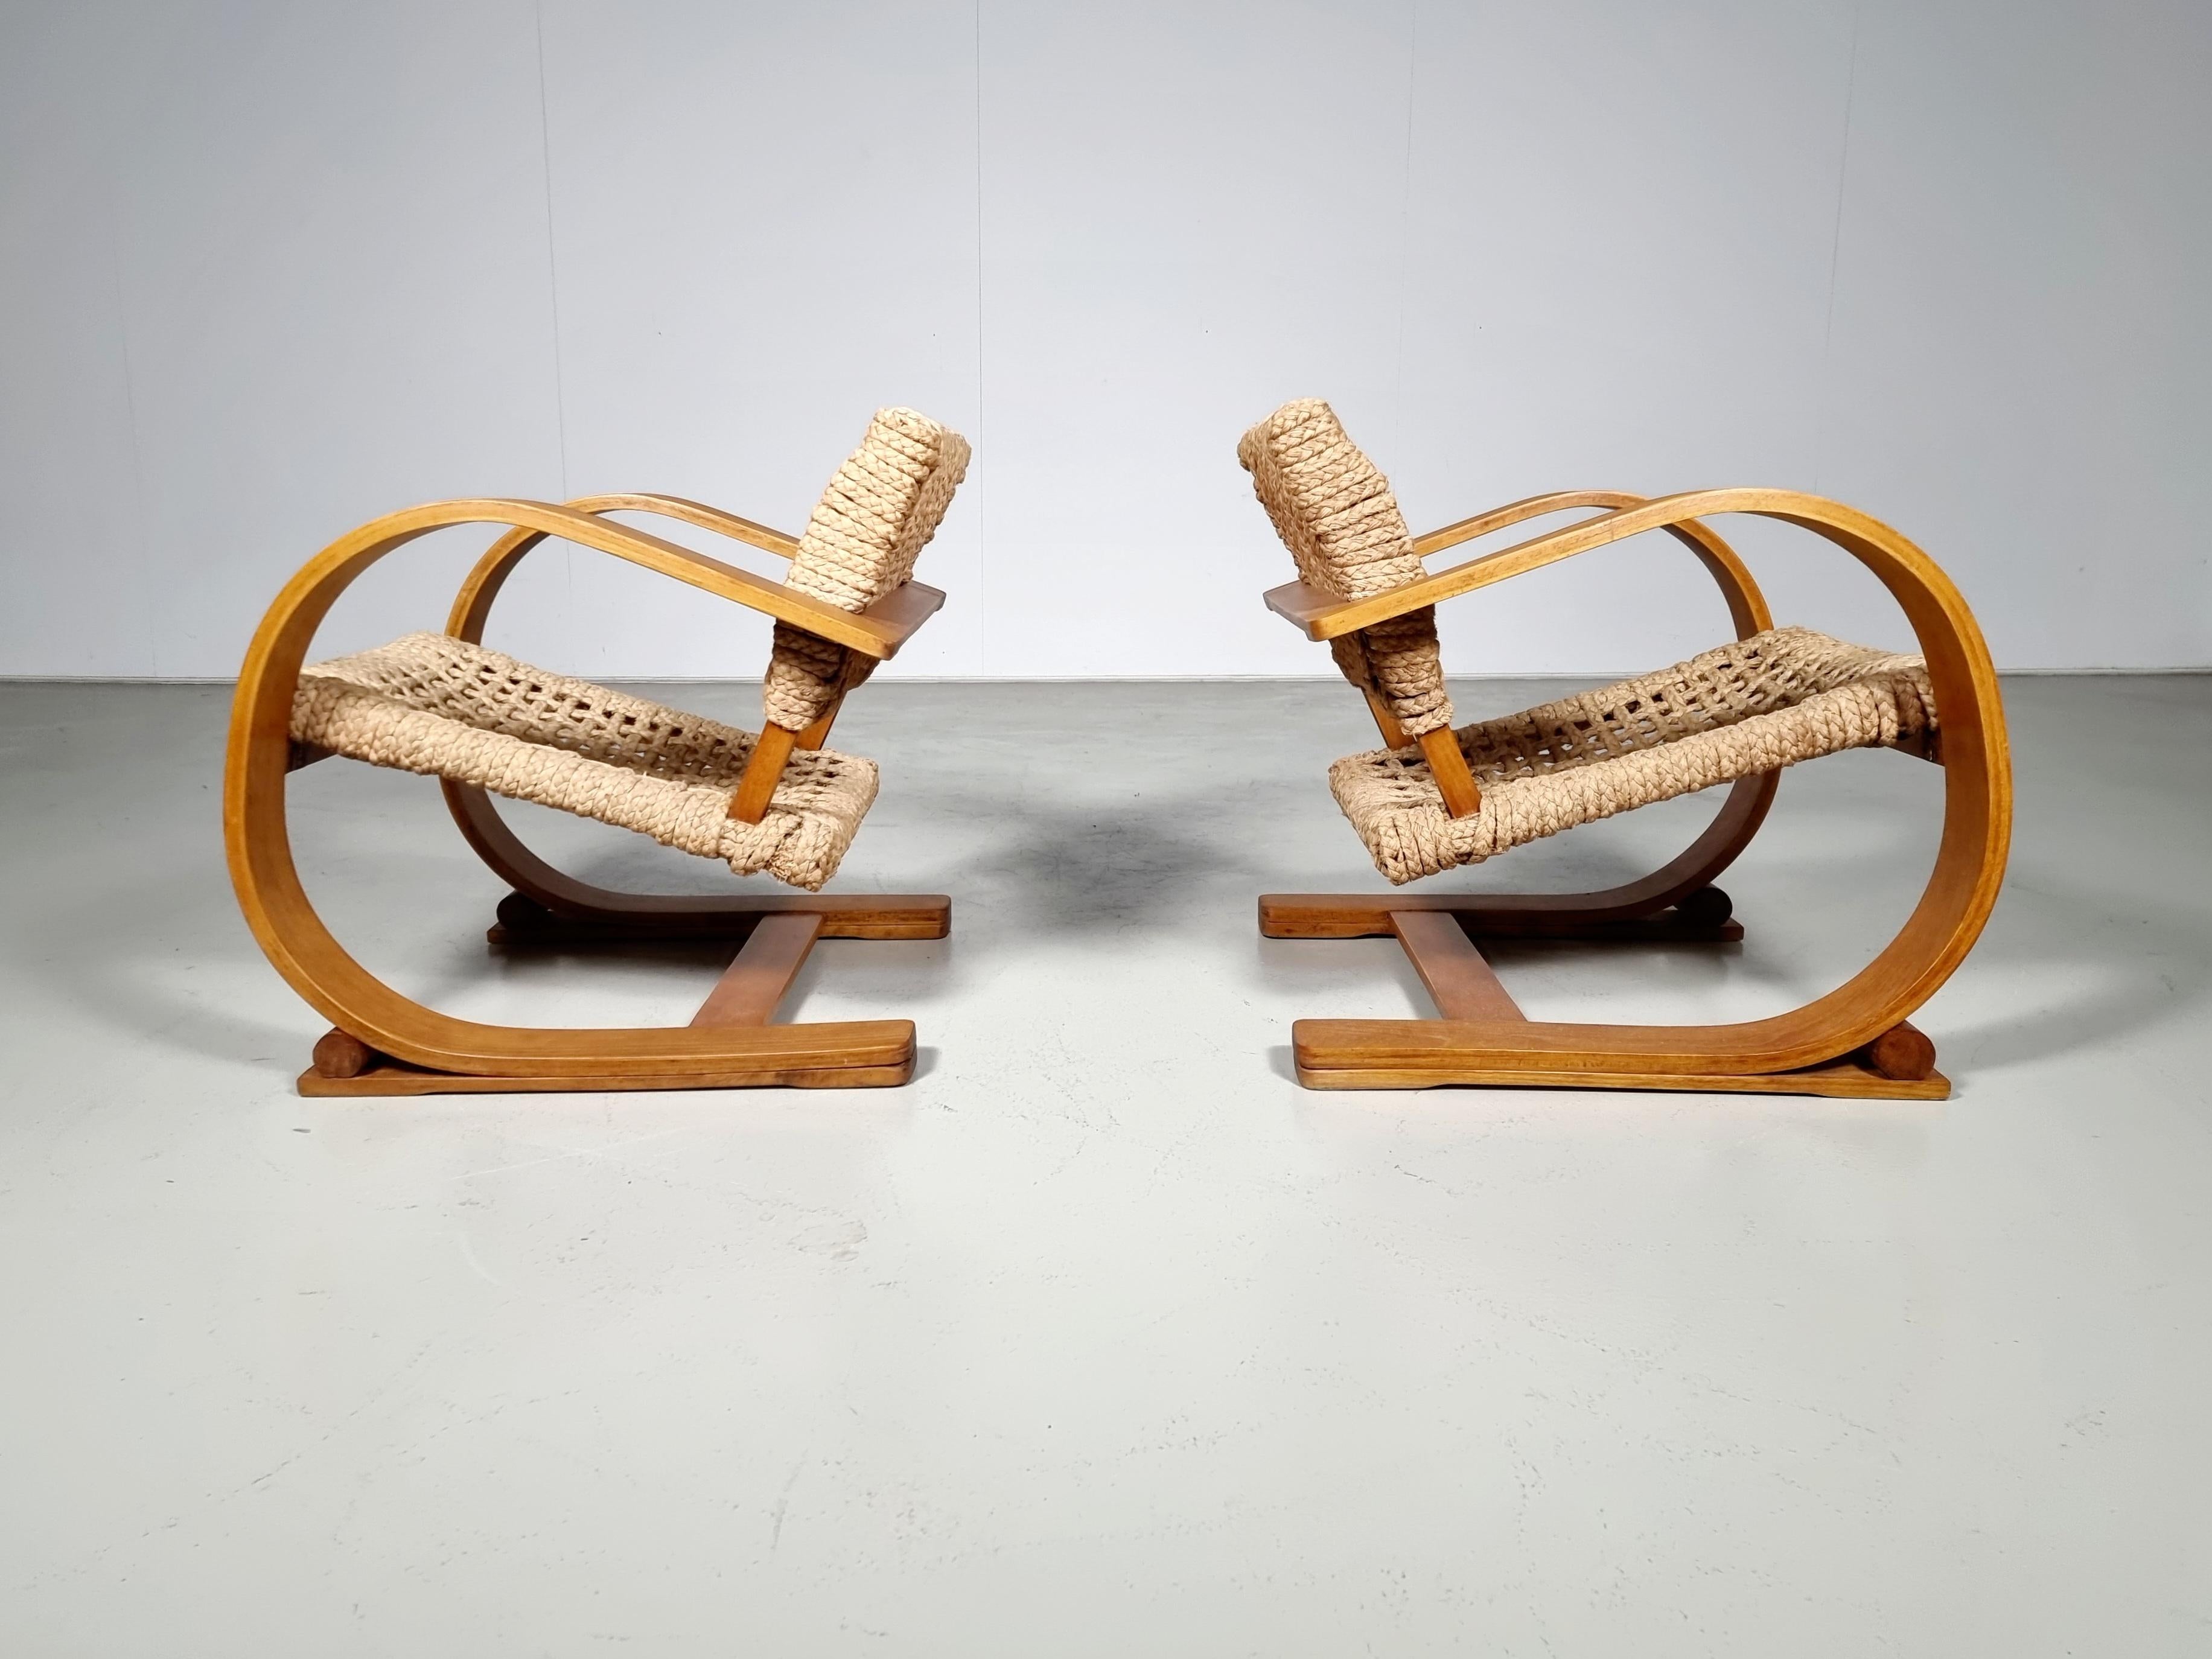 Mid-Century Modern Adrien Audoux & Frida Minet Rope Easy Chairs for Vibo ca. 1940 Paris, France